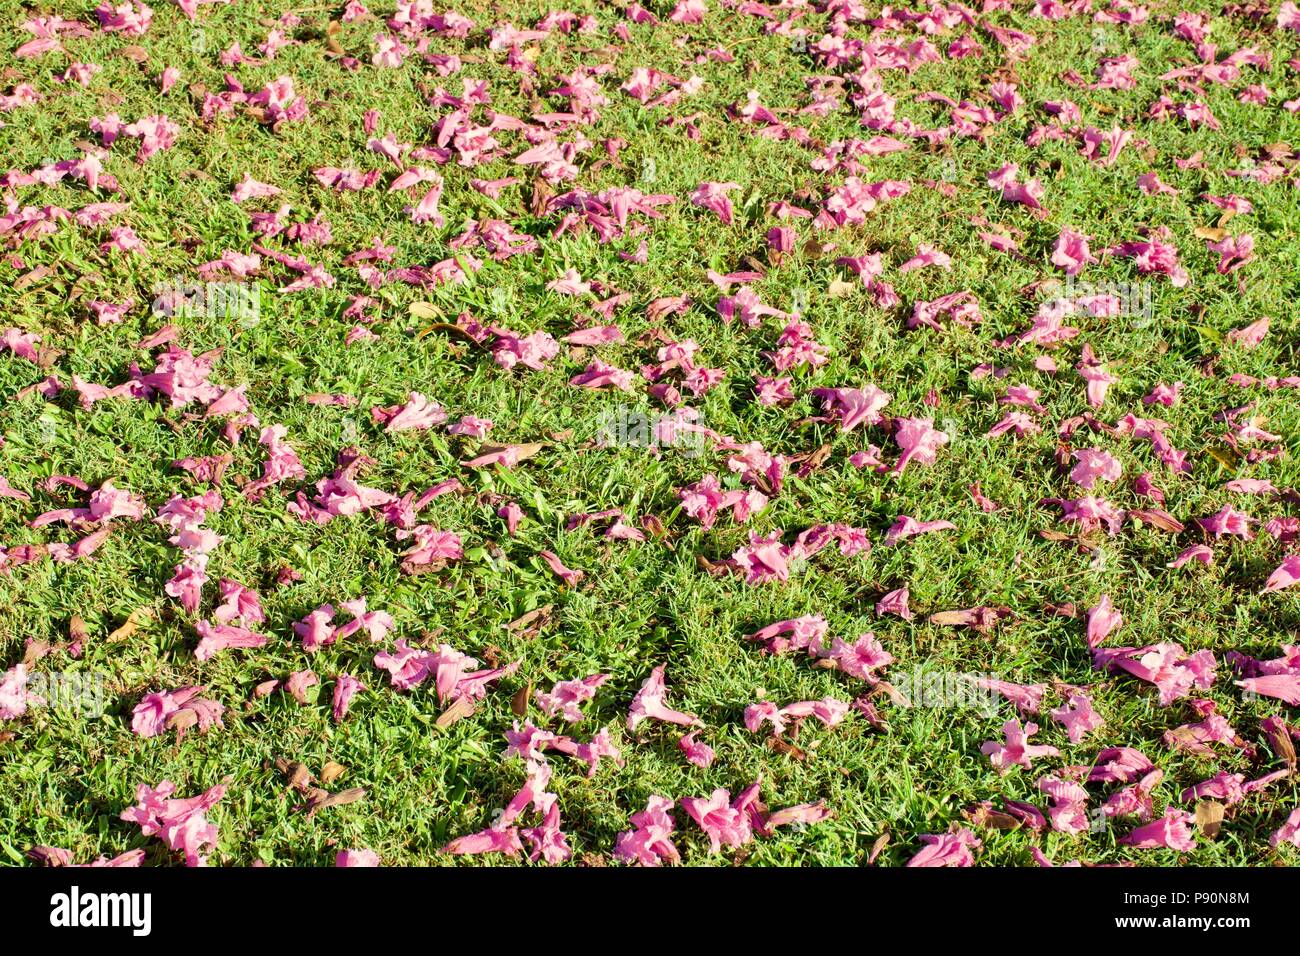 Fallen blossoms of the  Pink Trumpet Tree (Tabebuia impetiginosa) carpeting the ground around the base of the trees trunk Stock Photo